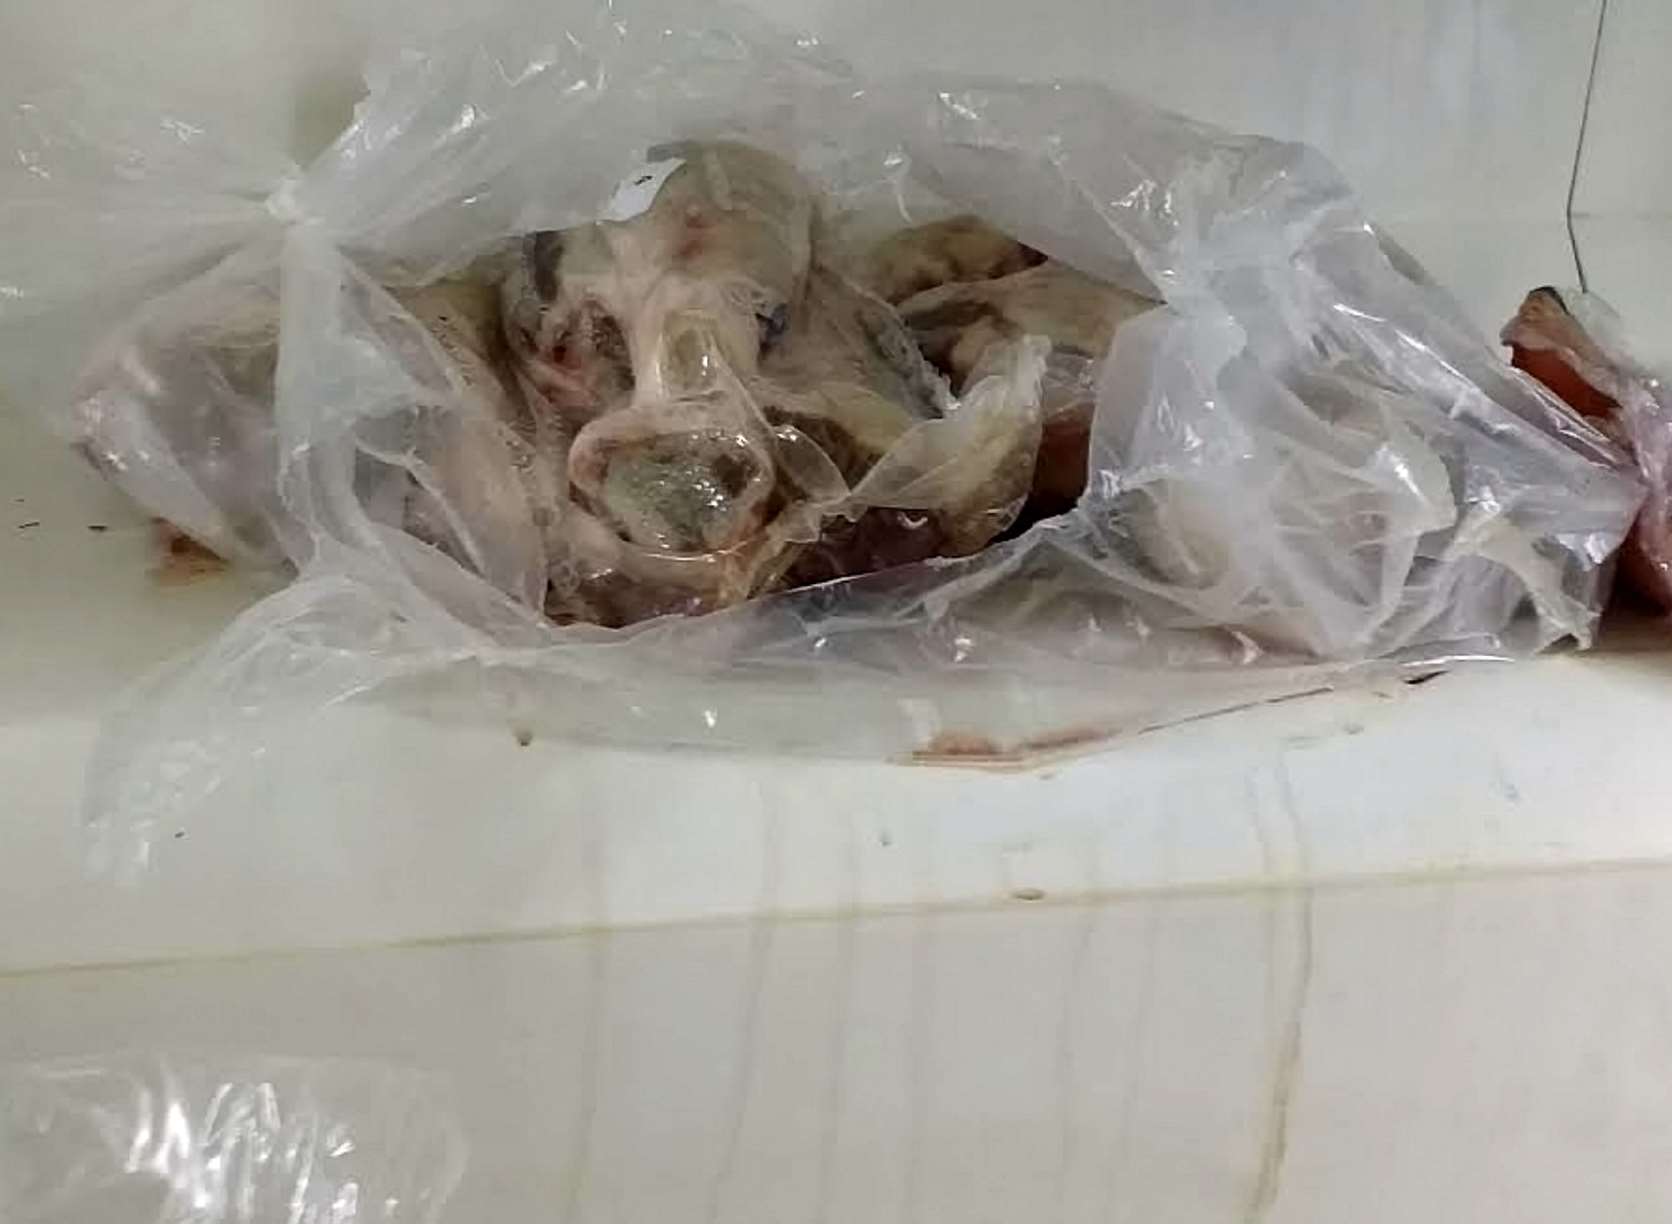 Drips appear to be coming from the lamb in the fridge. Picture: SWNS